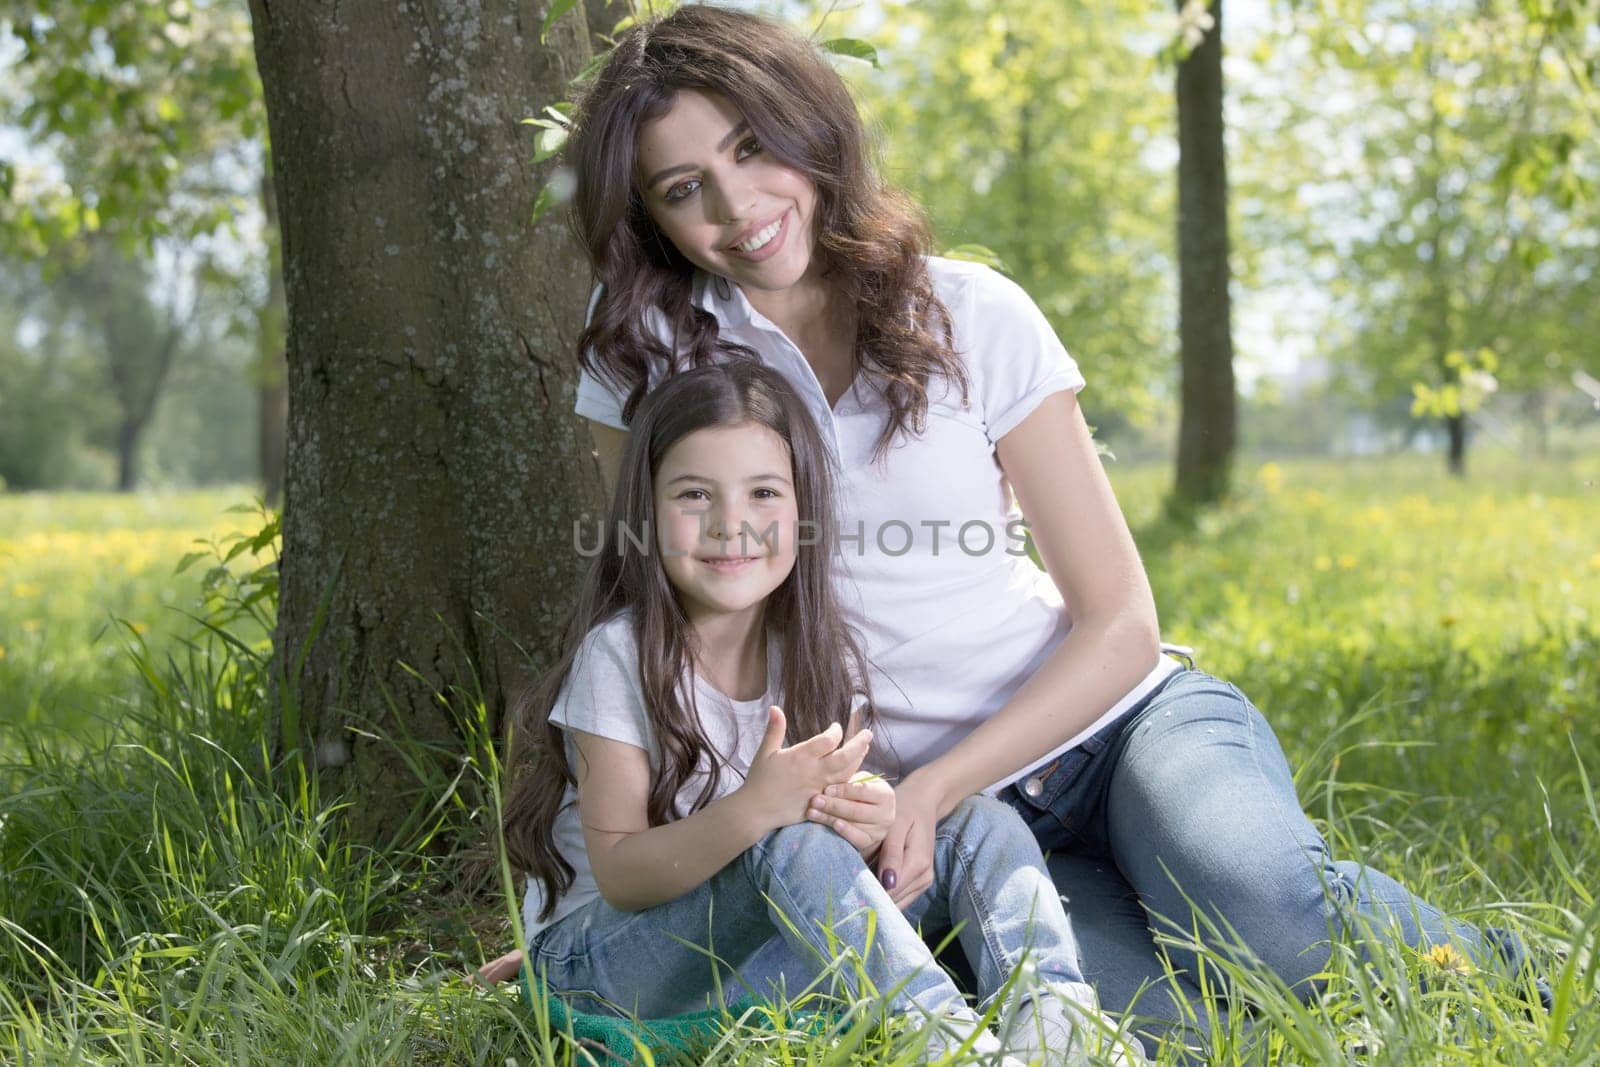 Beautiful young mother and daughter relaxing sitting on grass in park